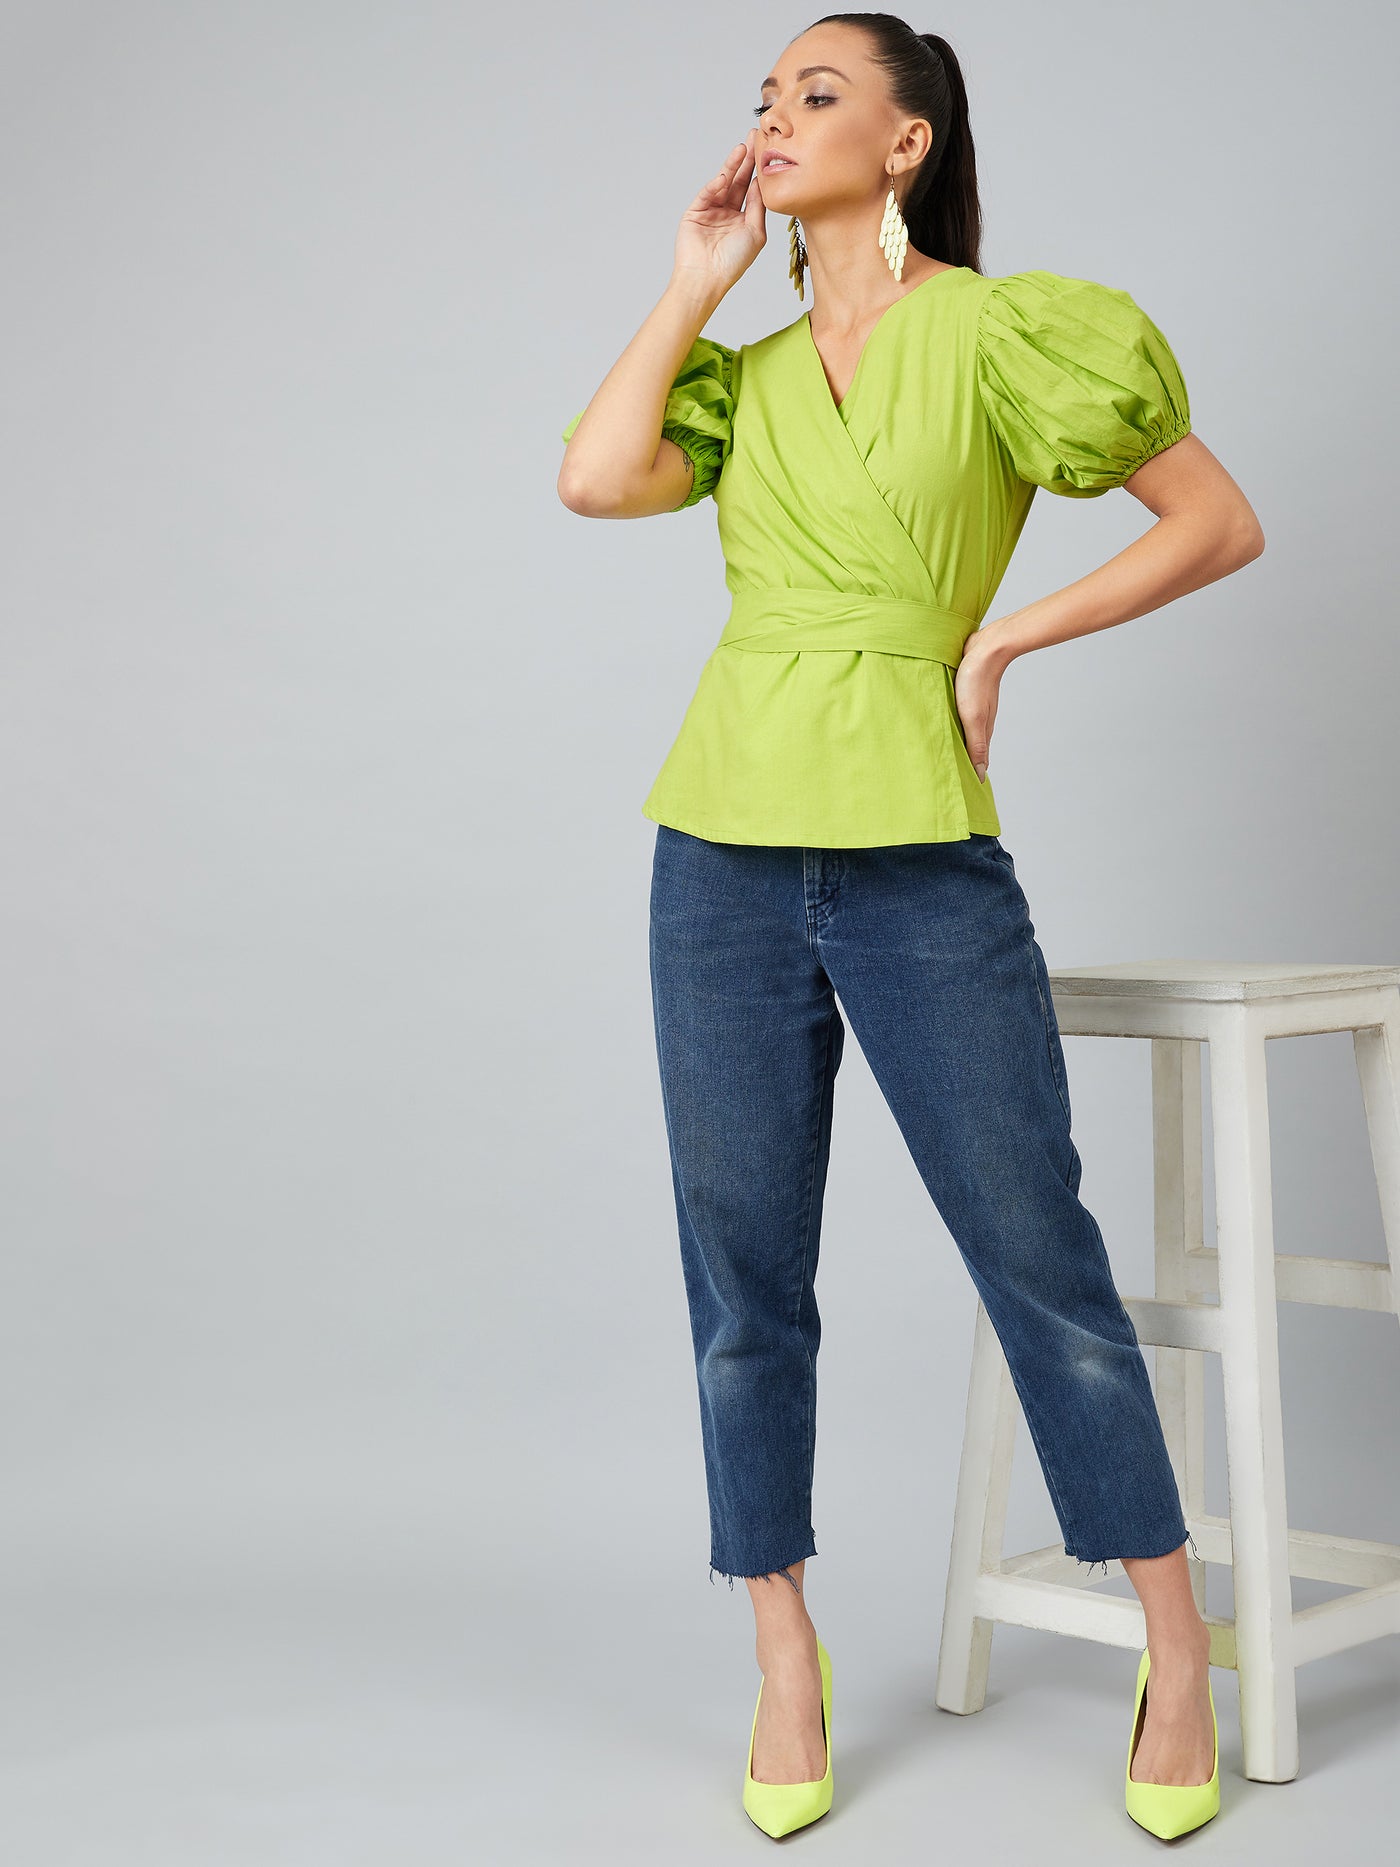 Athena Lime Green Knotted Wrap Top With Puffed Sleeves - Athena Lifestyle